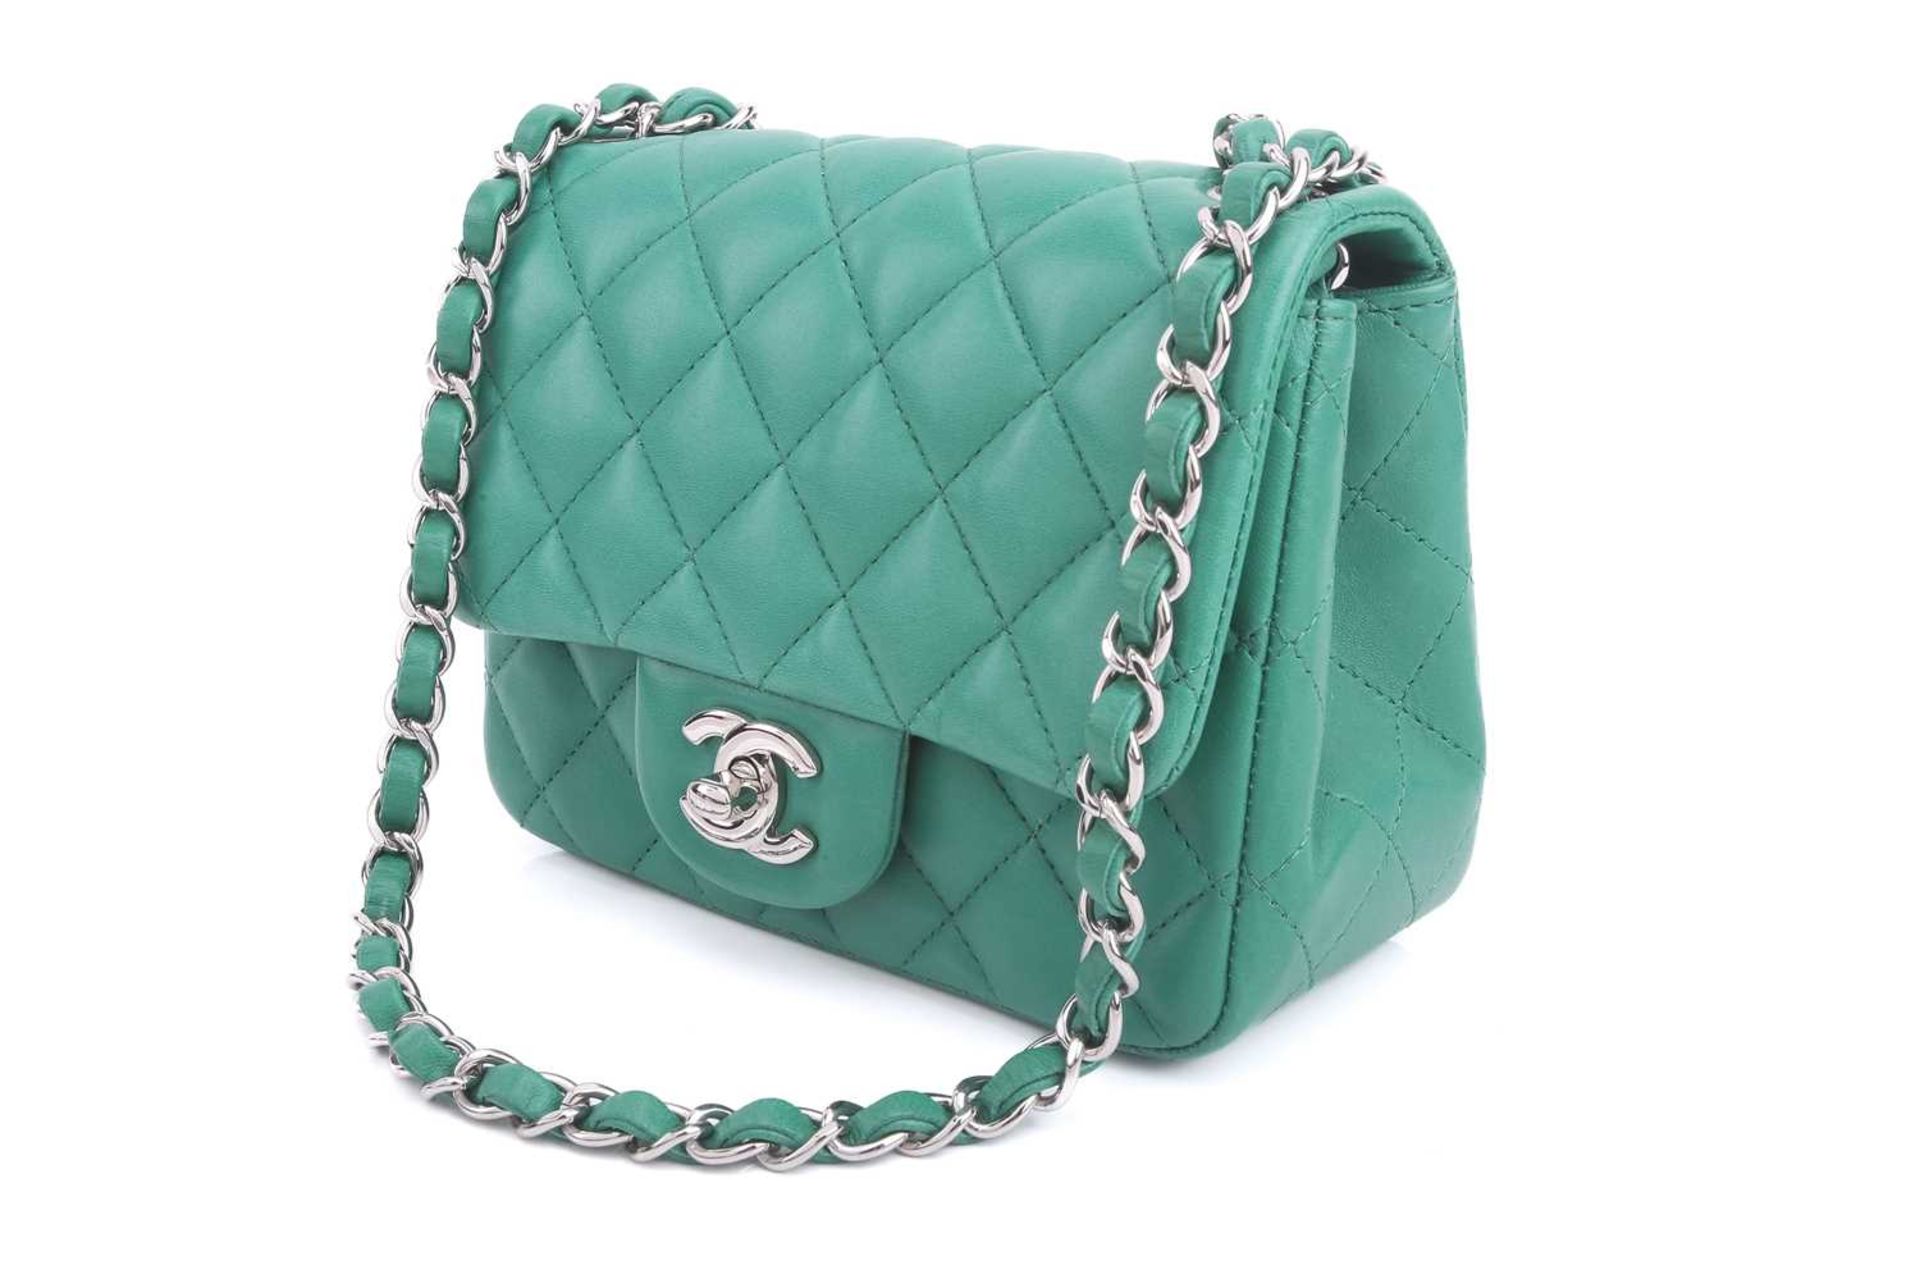 Chanel - a mini flap bag in green diamond-quilted lambskin leather, circa 2016, square body with - Image 9 of 12